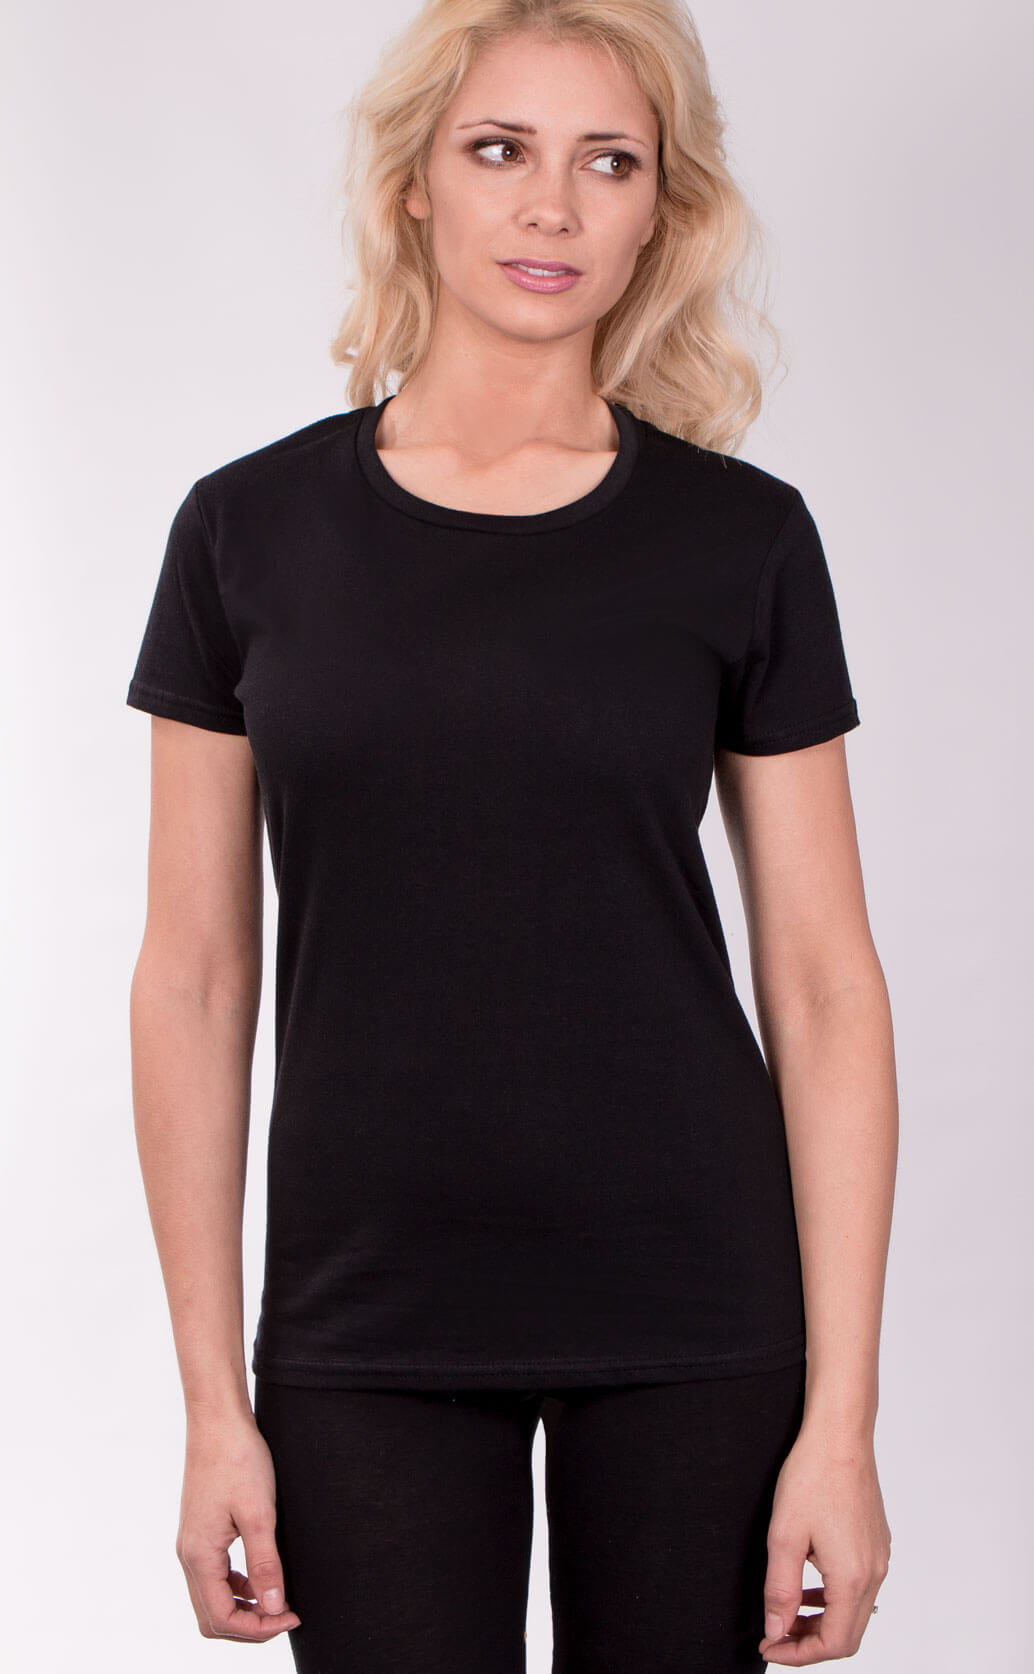 Size guide image for Lady Casual shirt type. Model is dressed in black